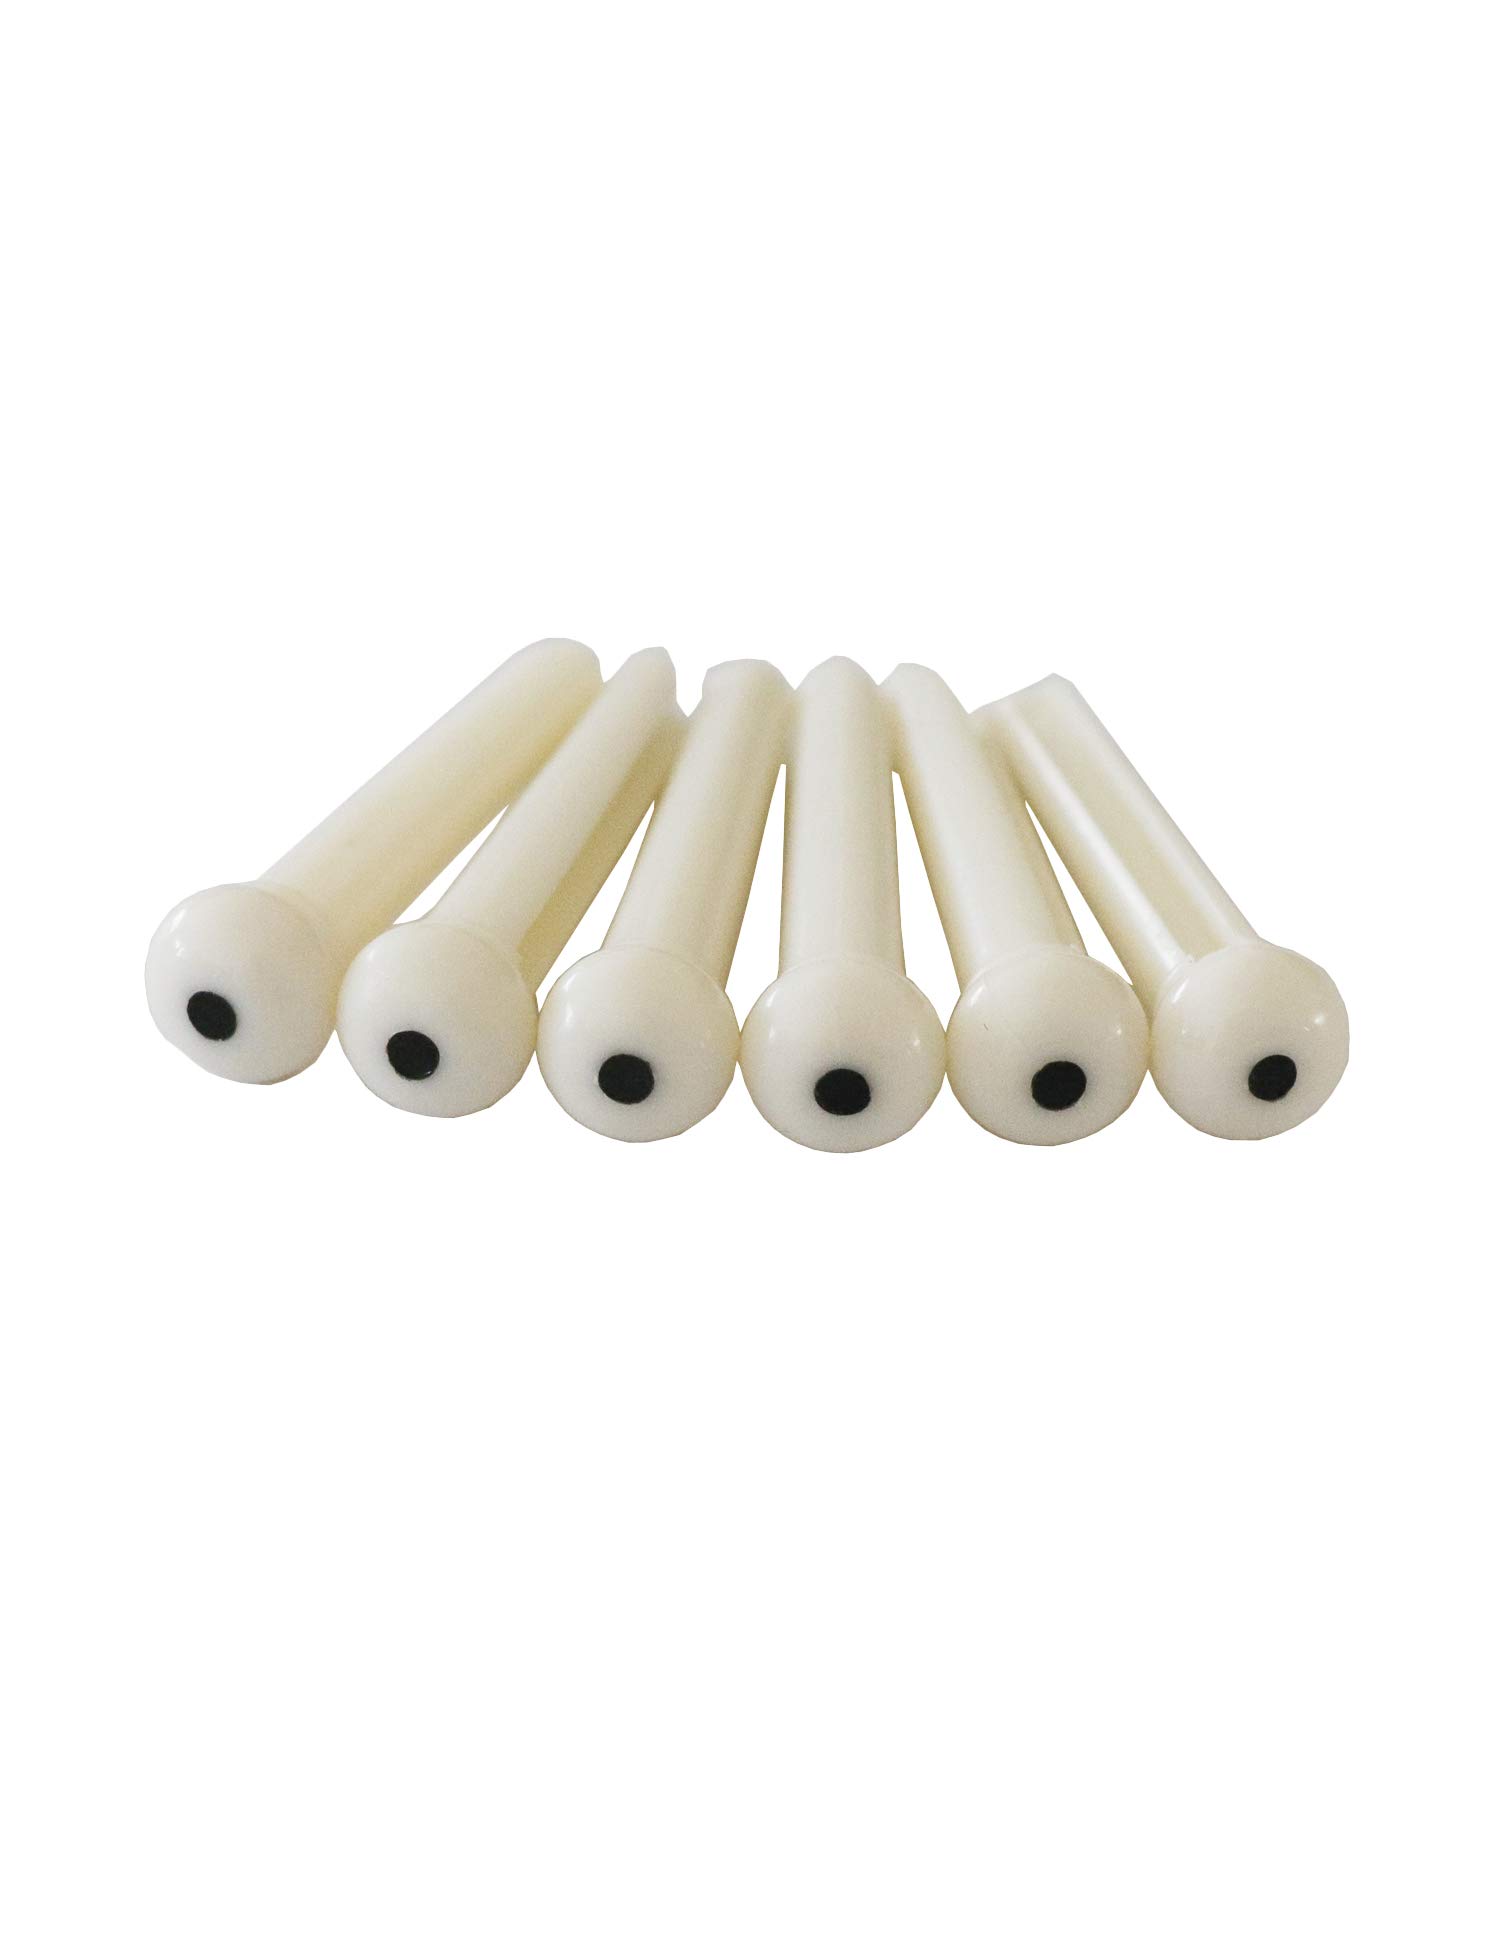 Book Cover Metallor Acoustic Guitar Bridge Pins String Peg Guitar Parts Replacement Pack of 6 Pieces White with Black Dot.